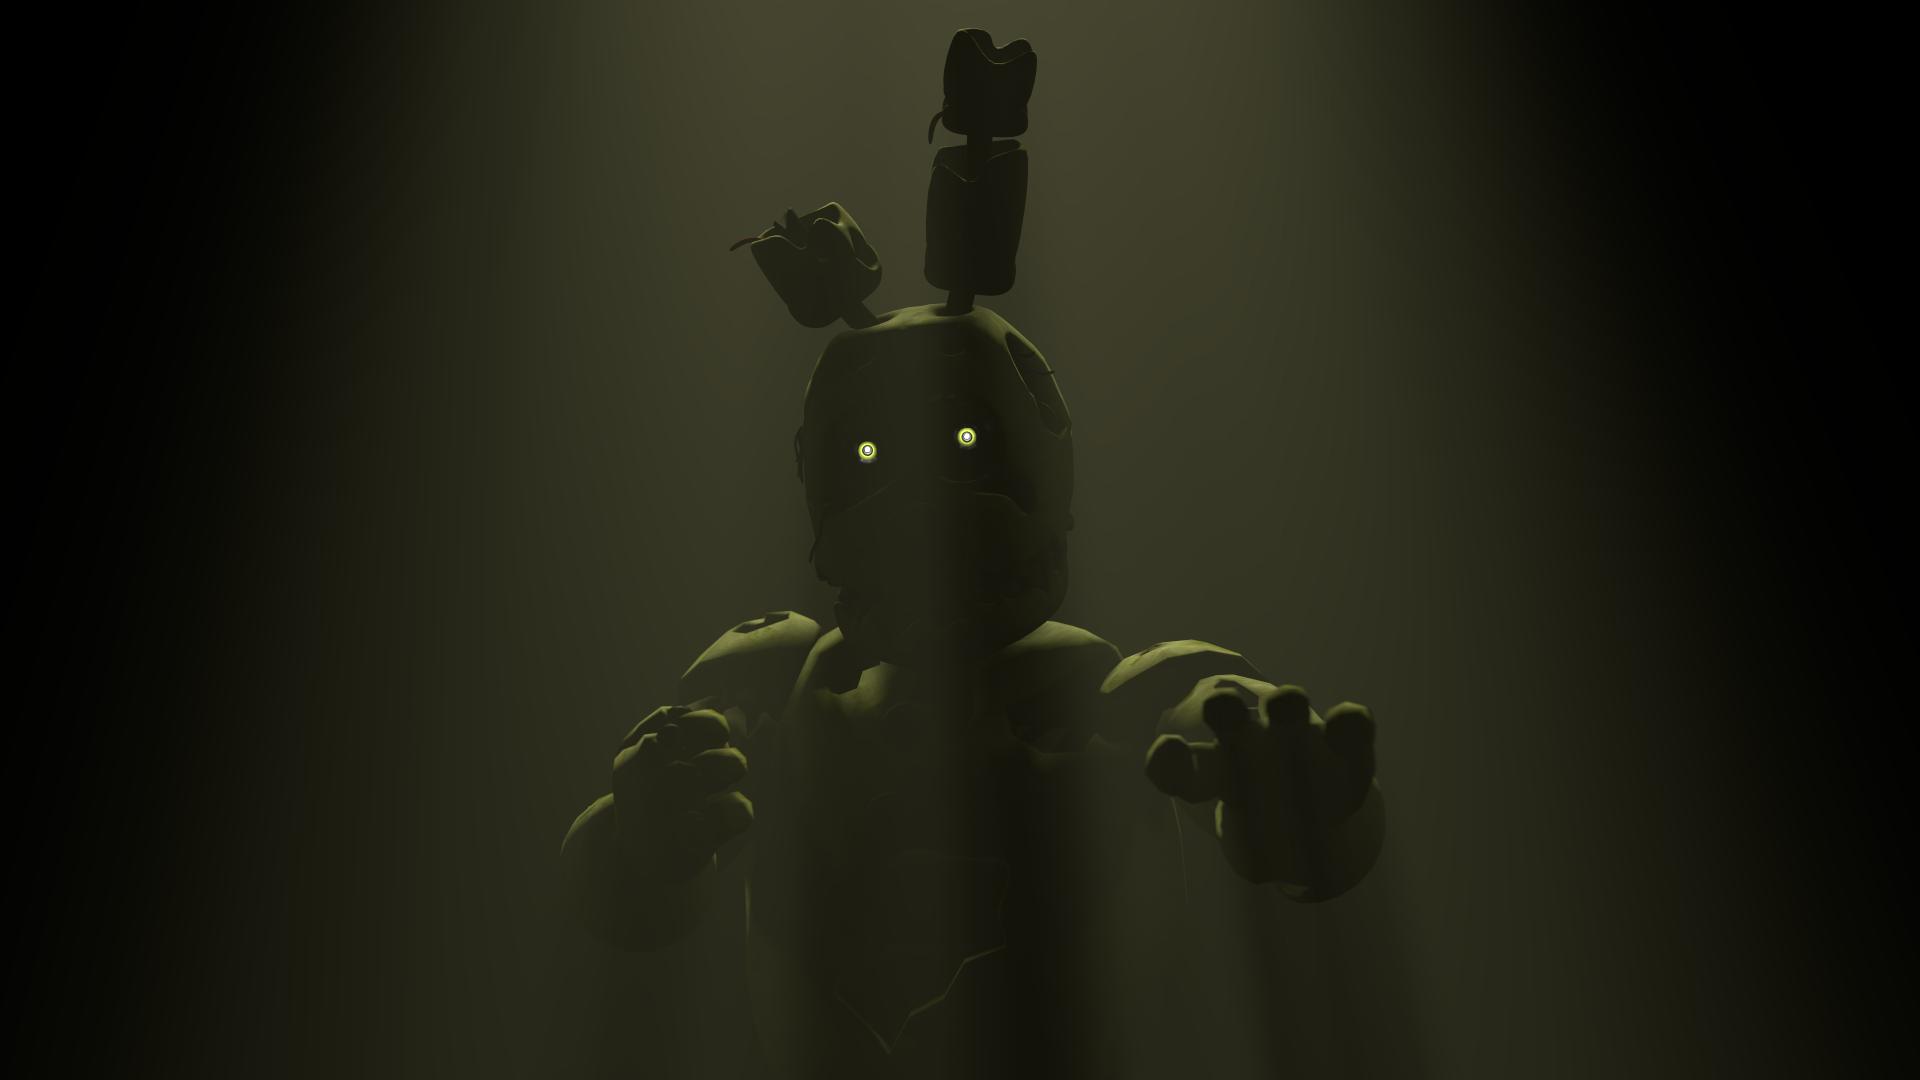 Five Nights At Freddys 3 Wallpapers Wallpaper Cave